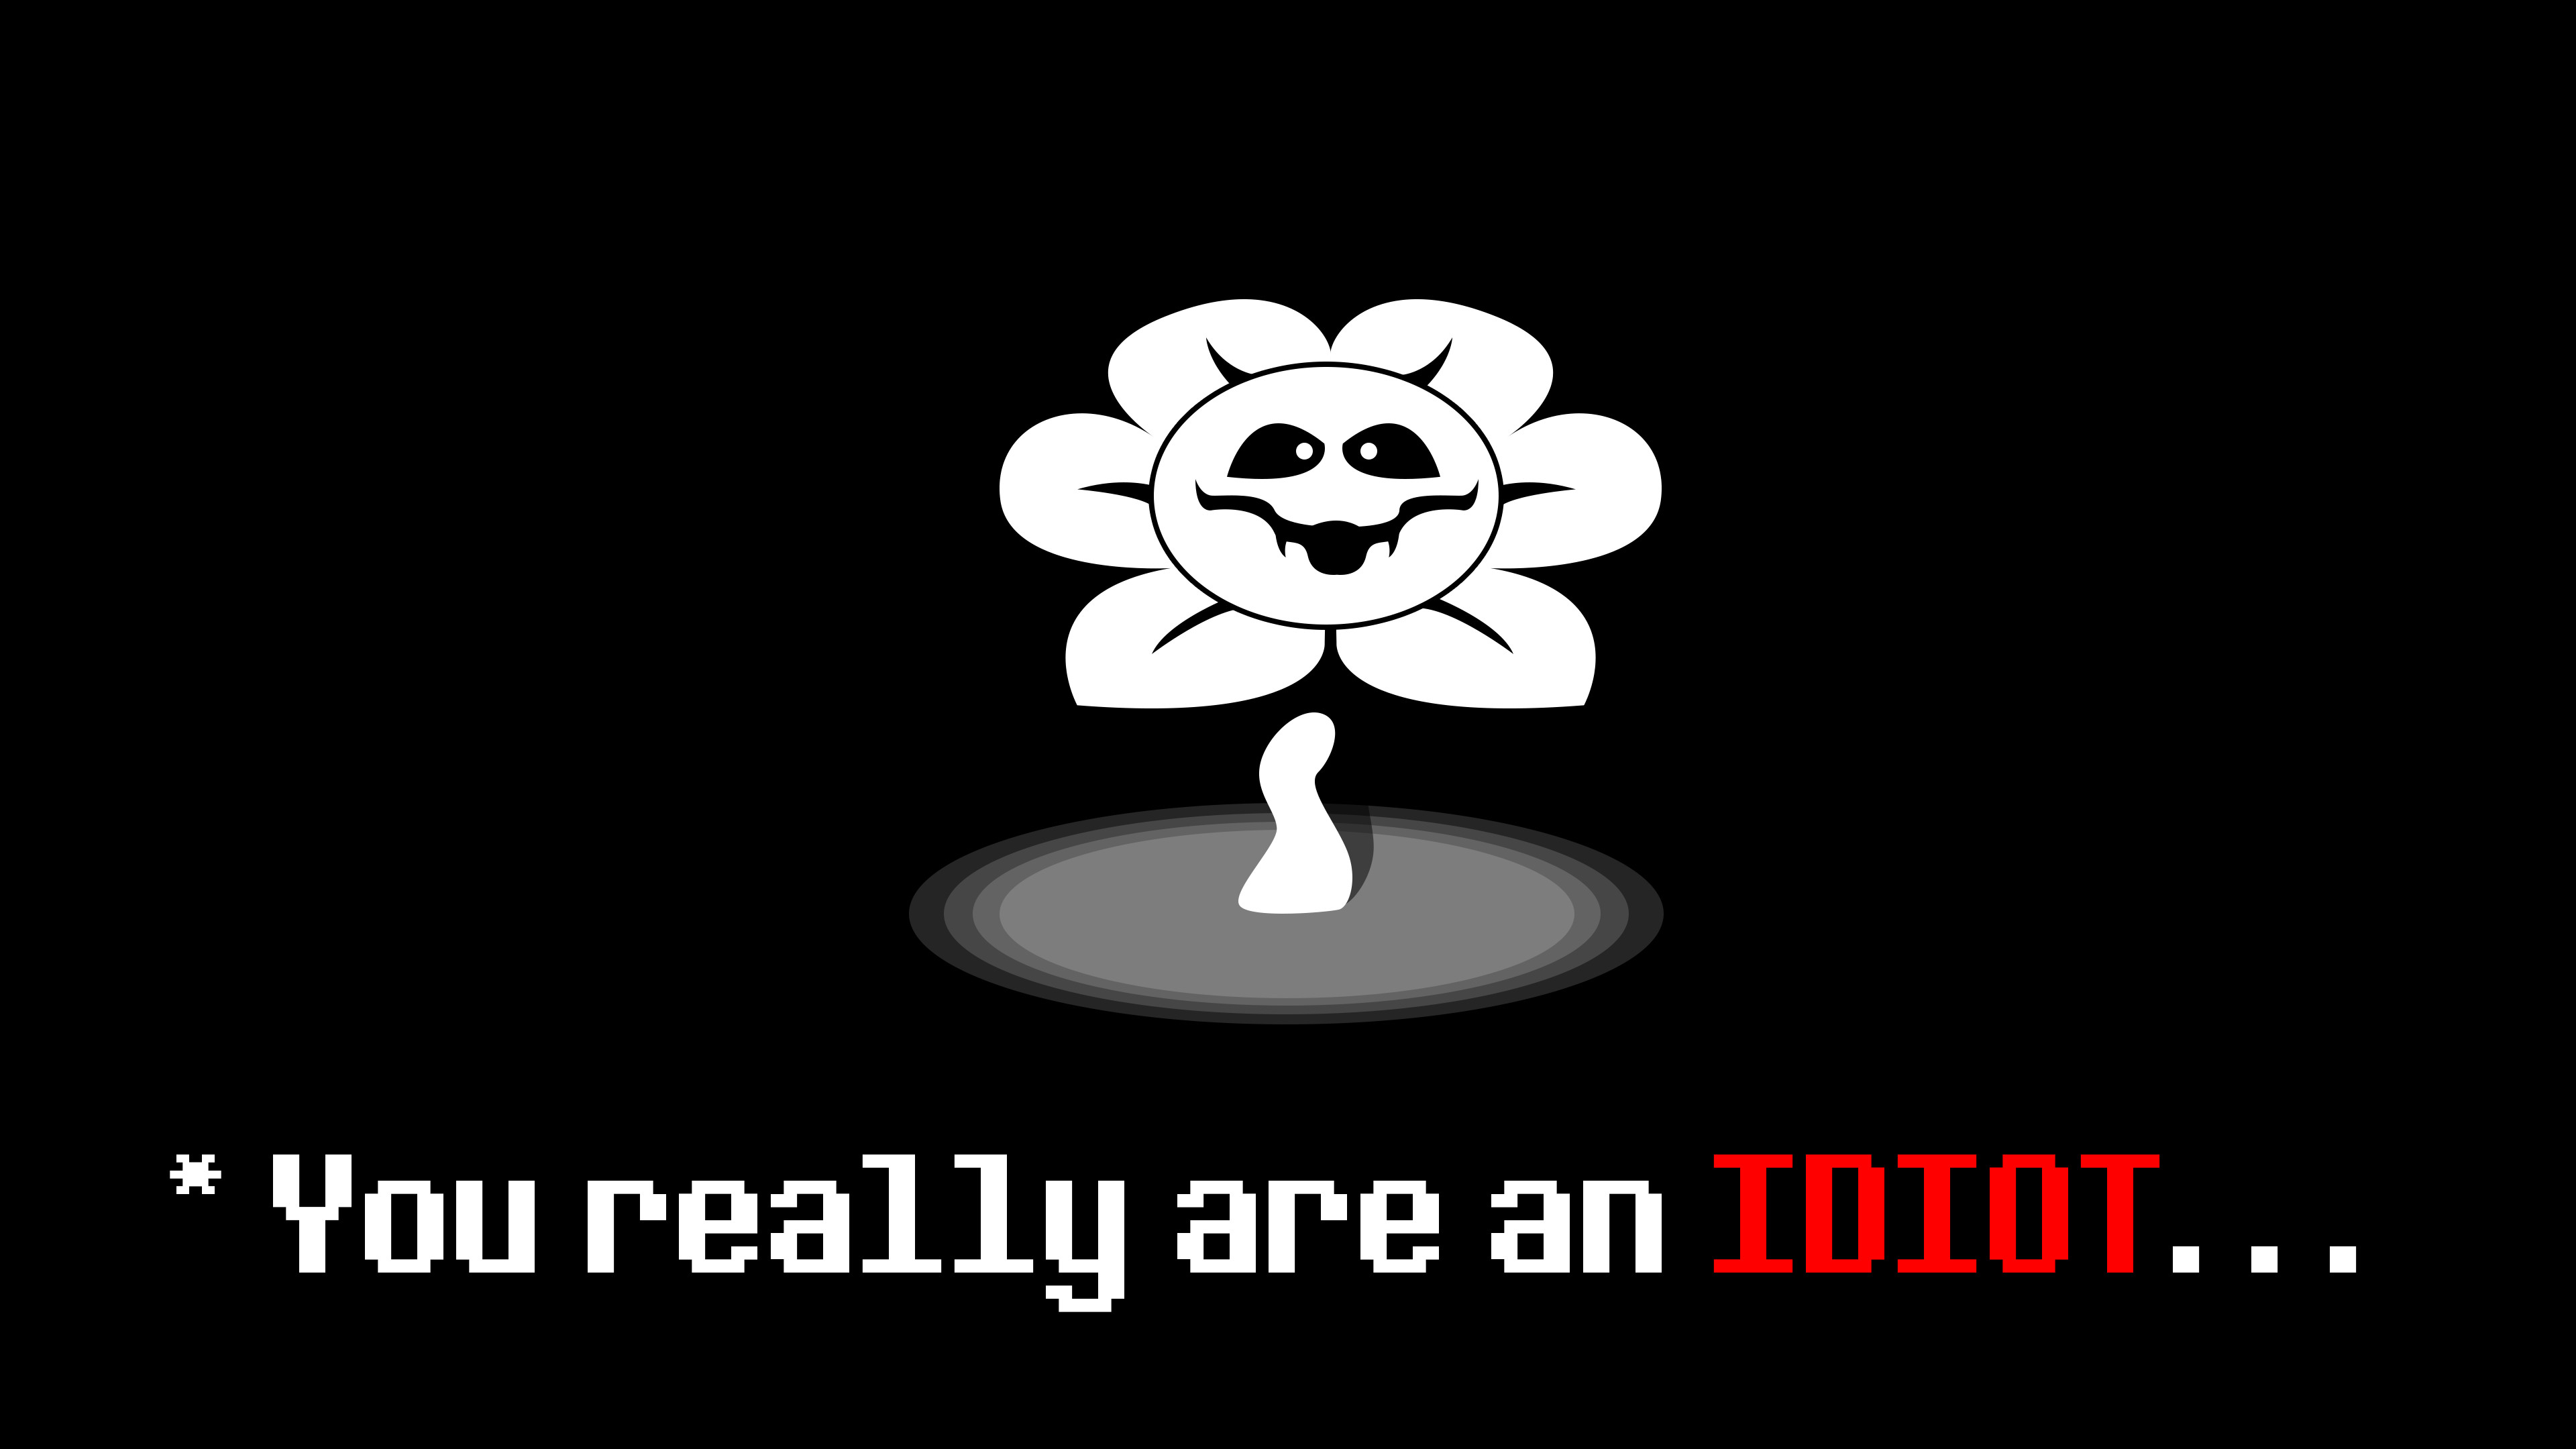 3840x2160 Flowey the flower wallpaper I quickly created. : Undertale